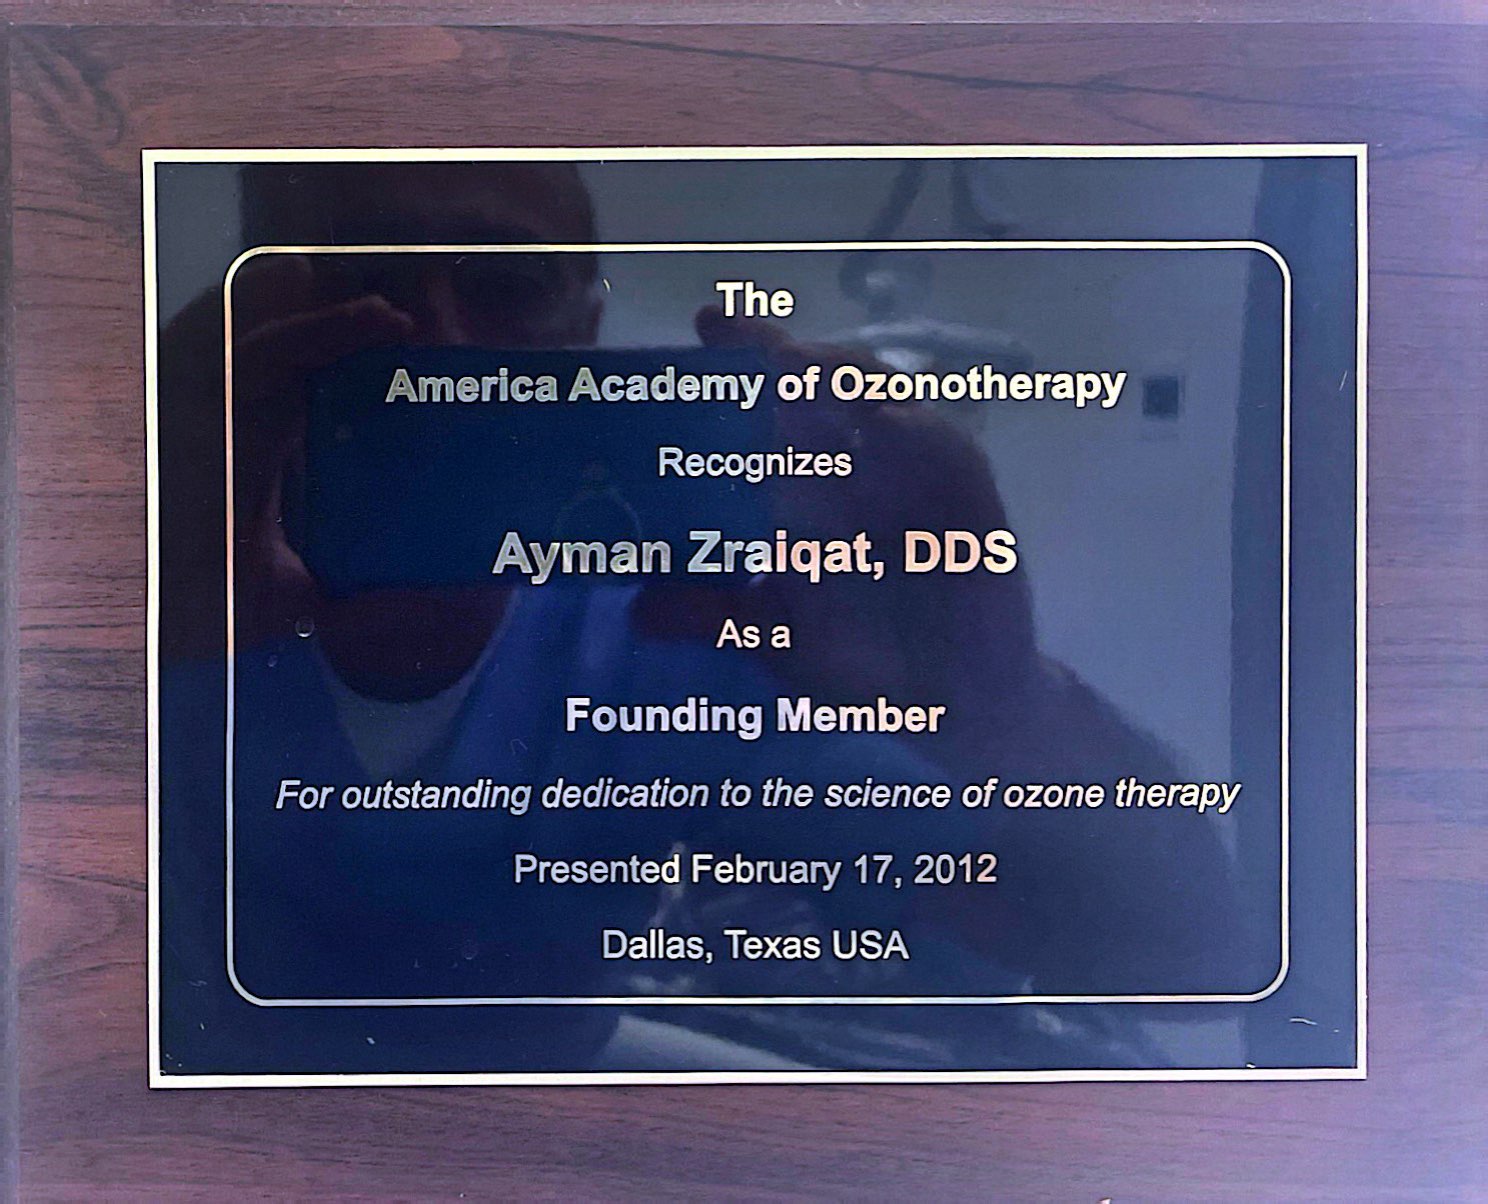 A plaque recognizing Ayman Zraiqat, DDS, as a founding member of the America Academy of Ozonotherapy, dated February 17, 2012.